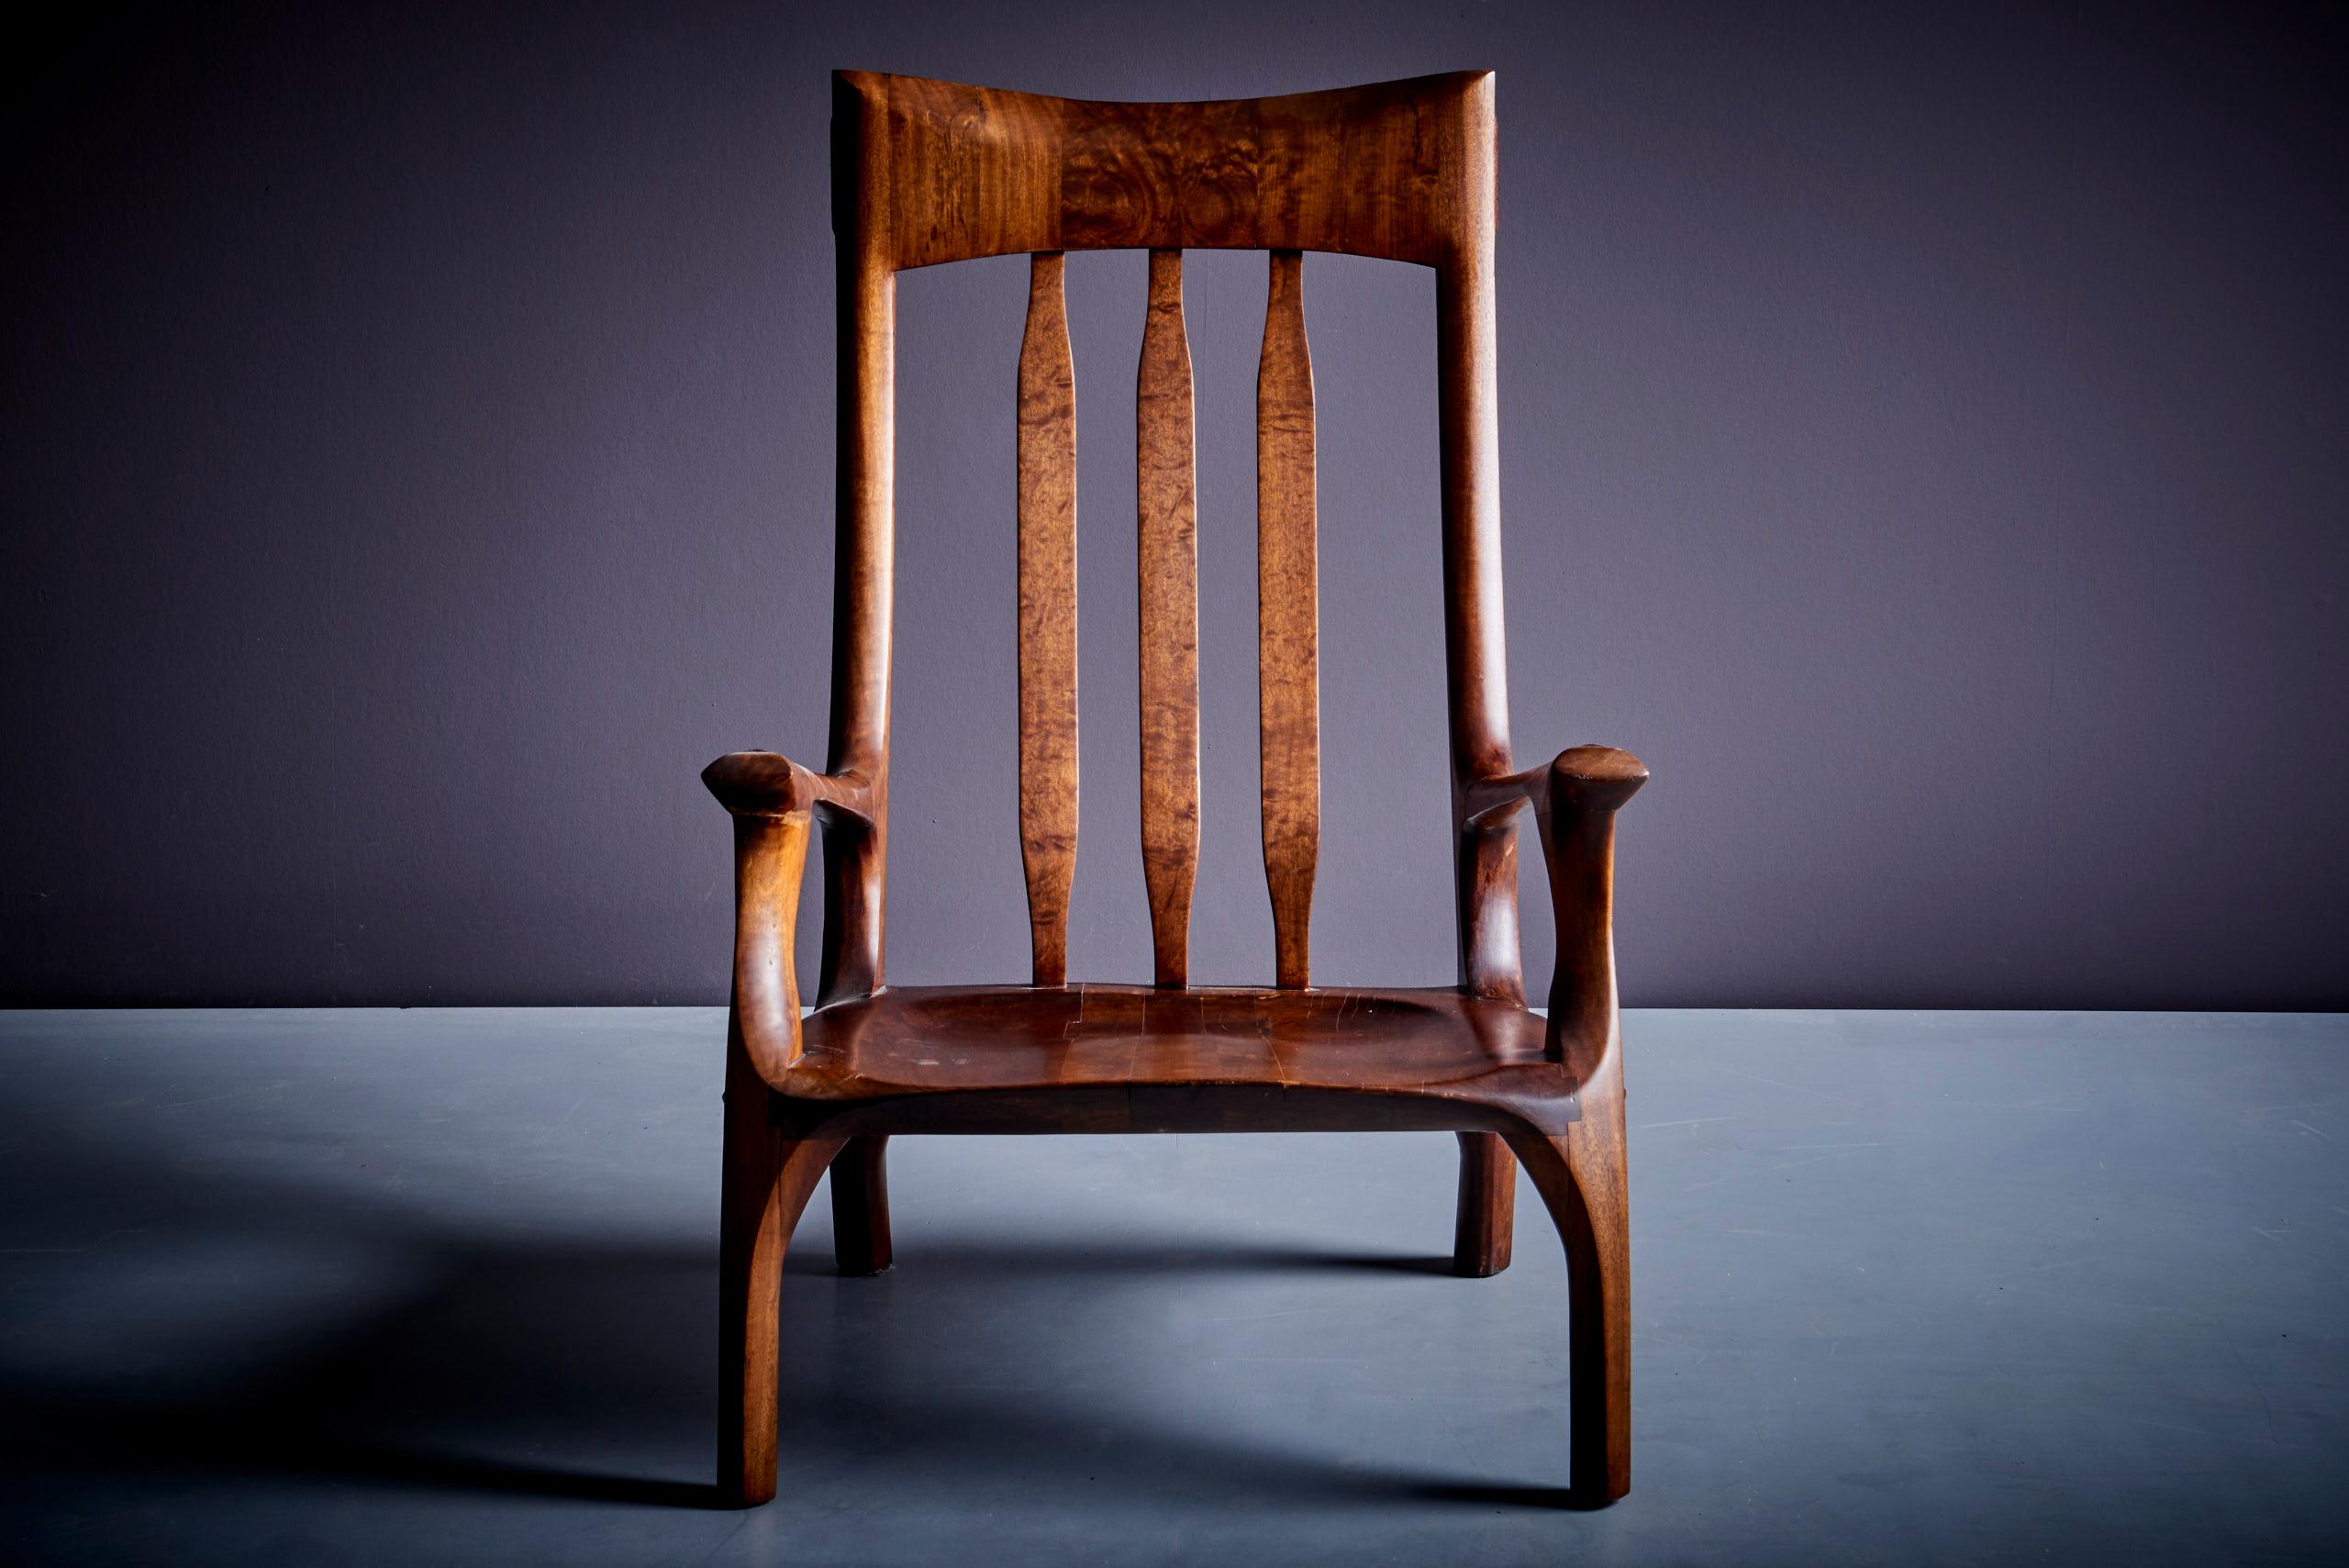 Extraordinary 1960s studio lounge chair designed by J. Benjamin Rouzie. Built by Ben Rouzie and Bob Kopf, a North Carolina fine woodworker, for his wife Miriam Silverman Rouzie, approximately 1970 for there living room space at 804 Kenwick Drive,